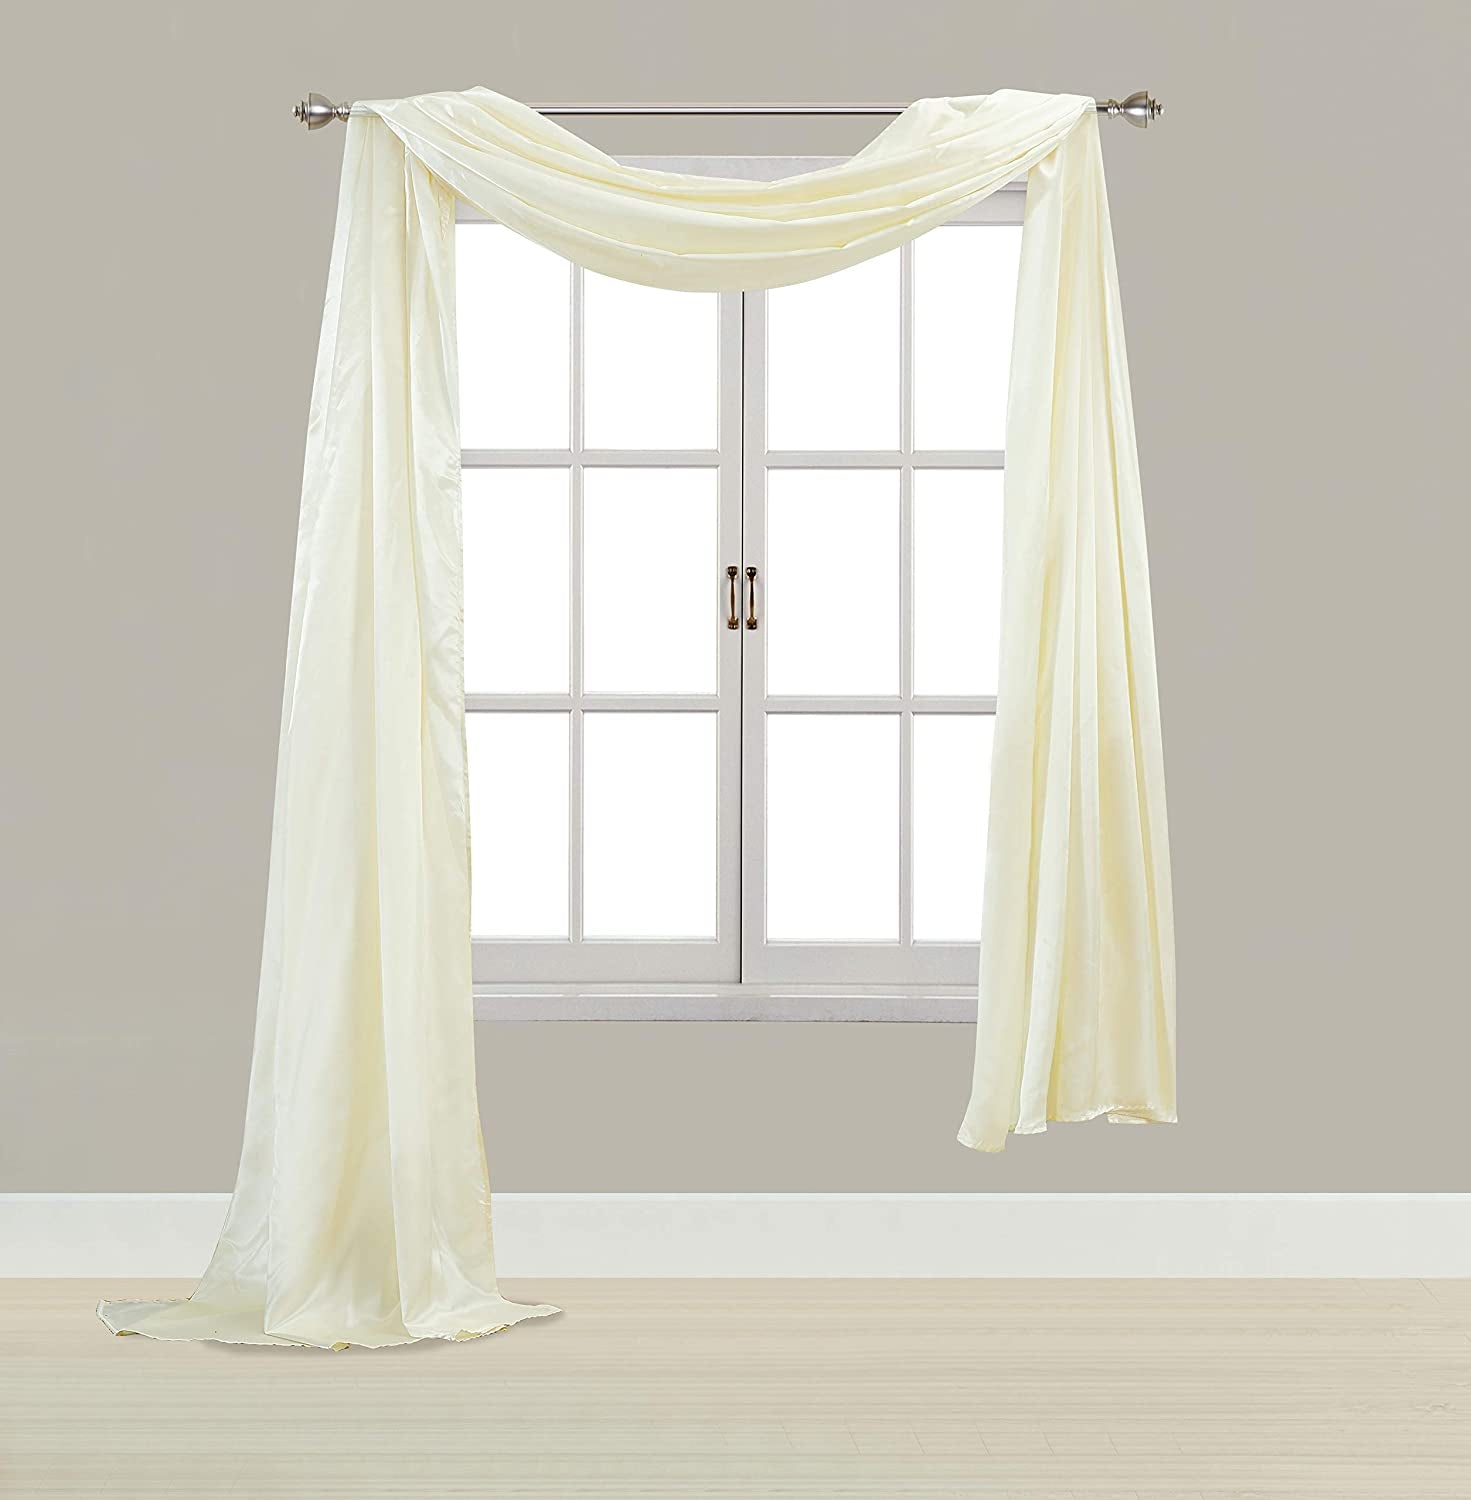 Elitehomeproducts Satin Window Scarf, Swag Valance, Fully Stitched & Hemmed